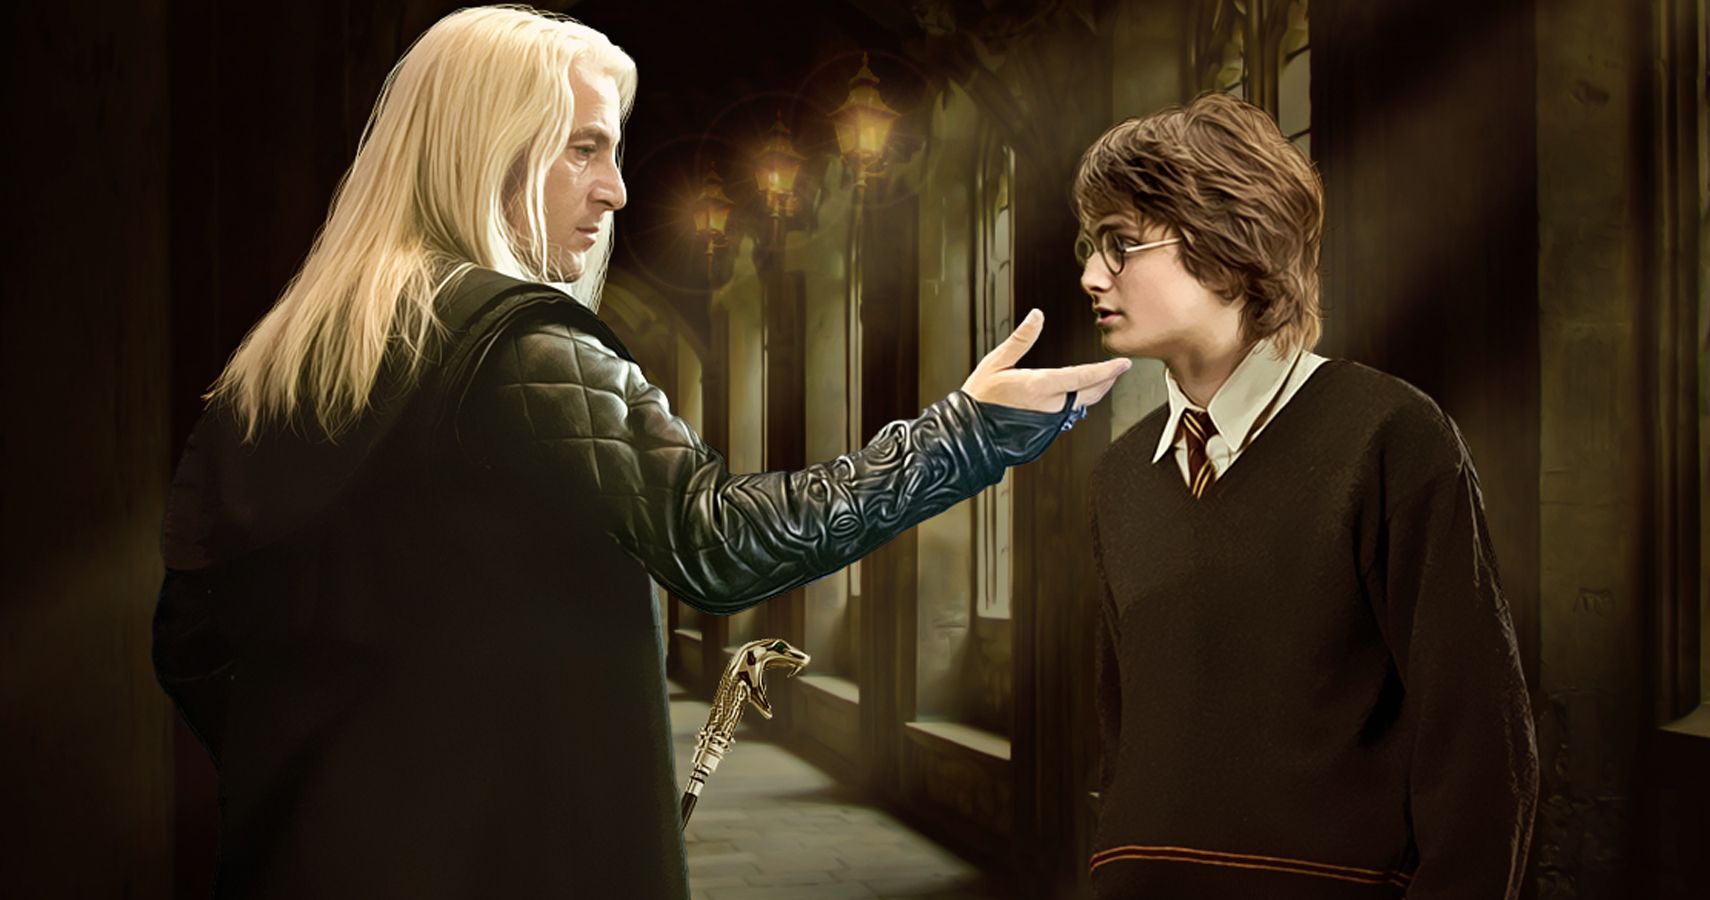 Harry Potter: 10 Biggest Ways Draco Malfoy Changed From